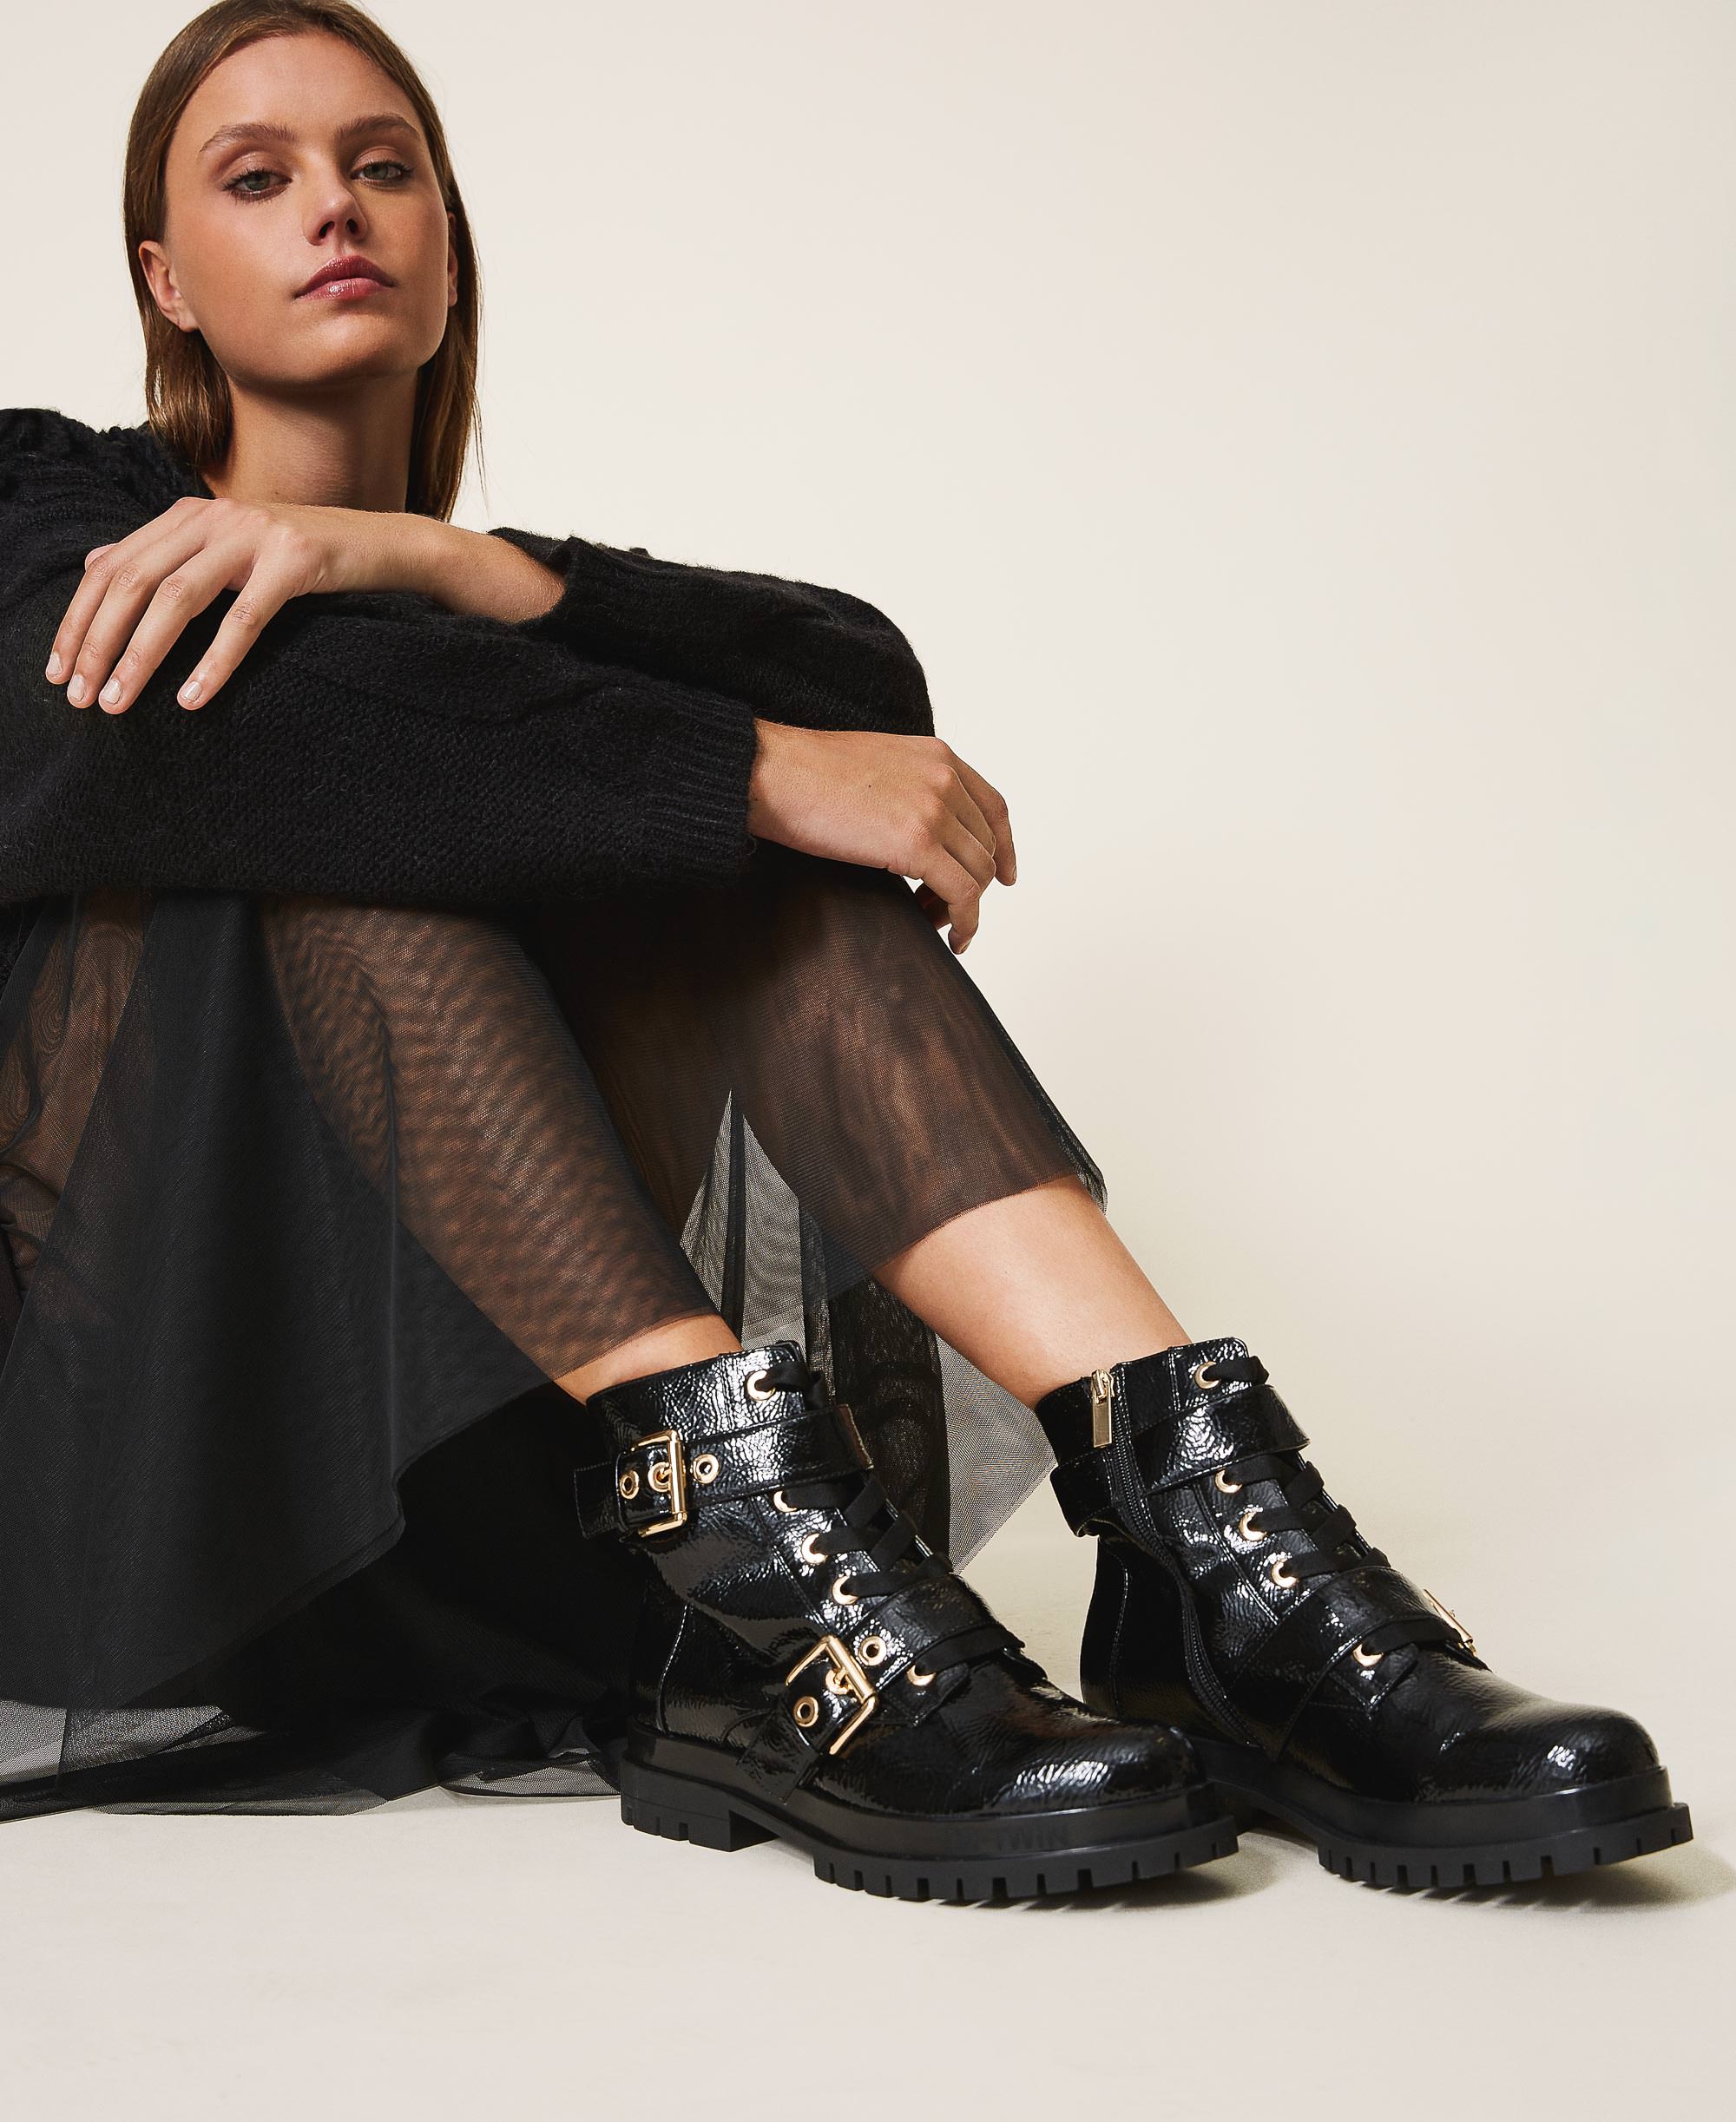 patent leather biker boots